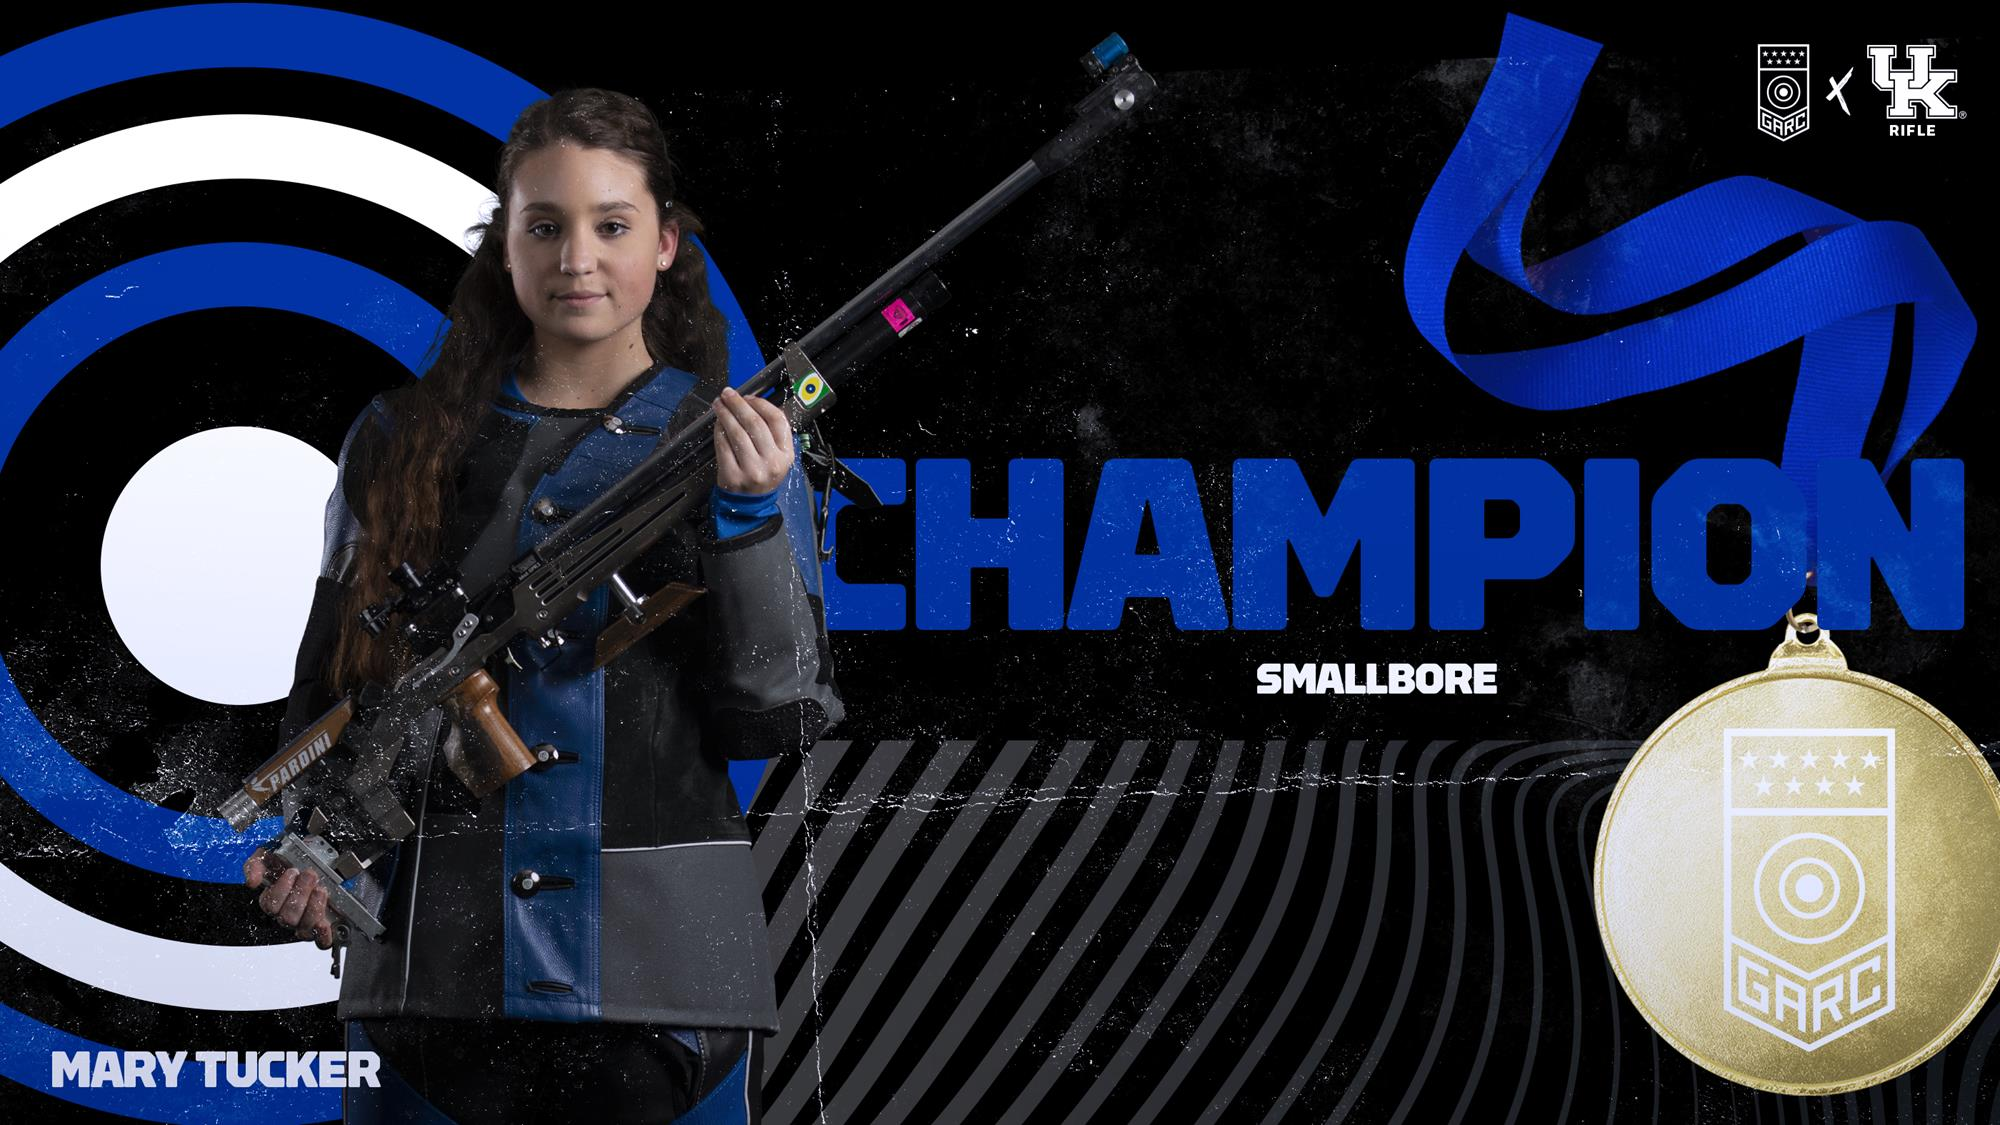 Tucker Earns Gold, Wildcats Second After Smallbore